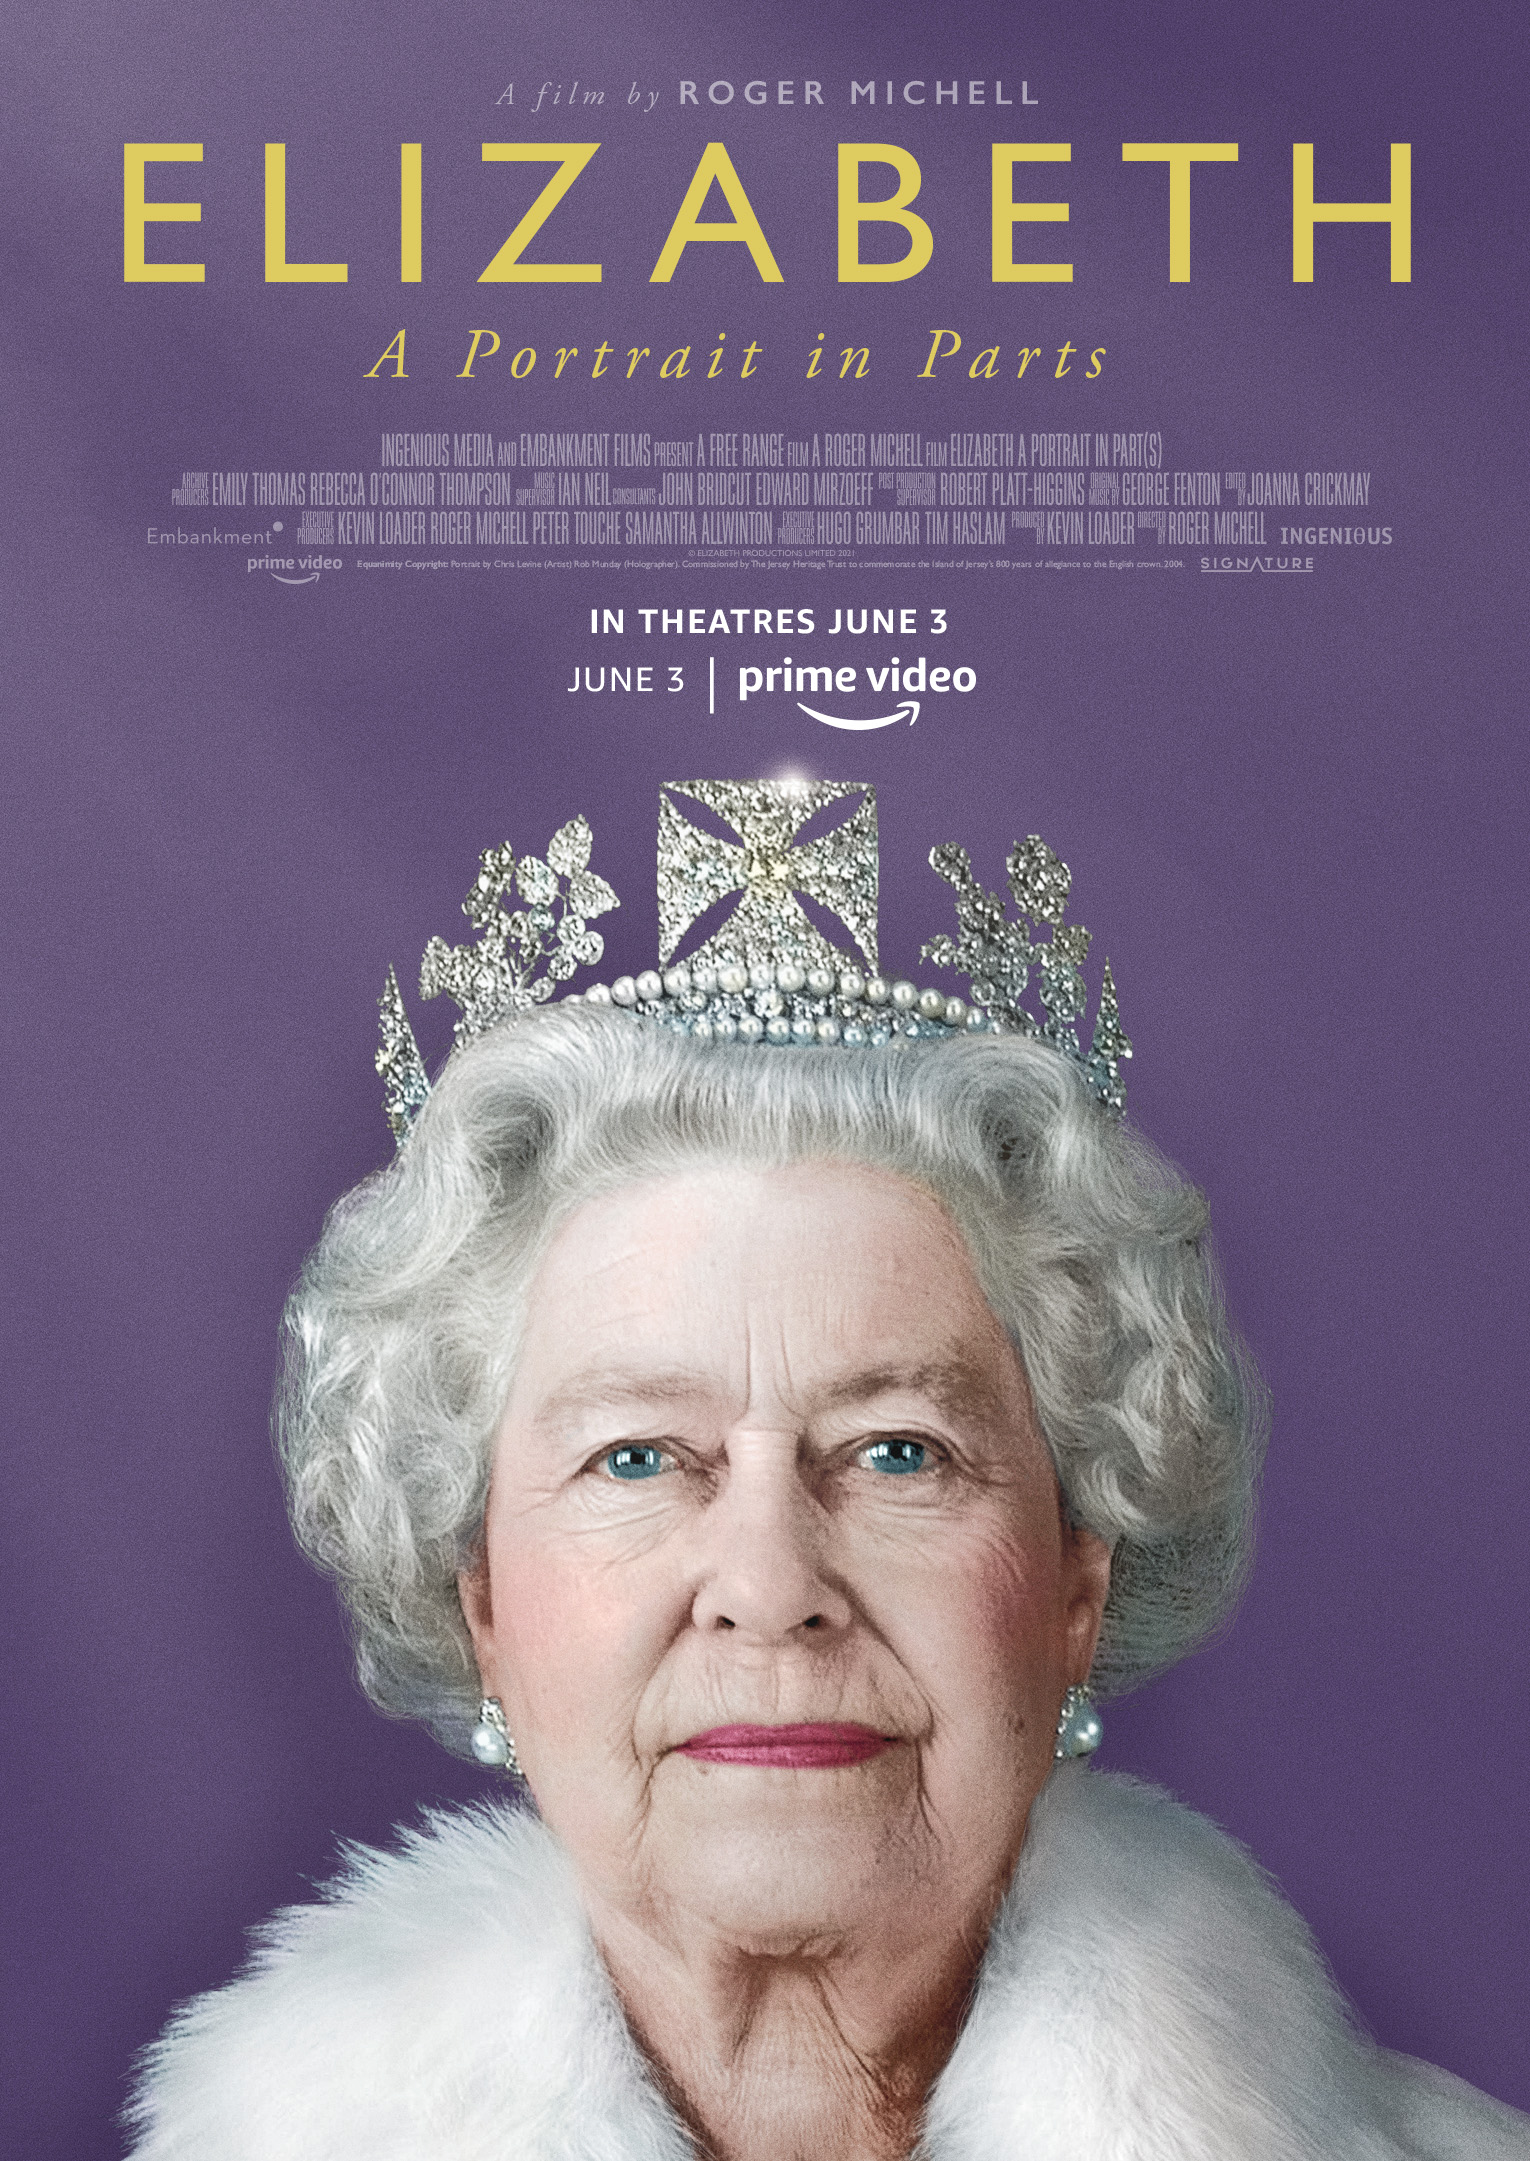 Elizabeth A Portrait in Parts will be screened from June 3